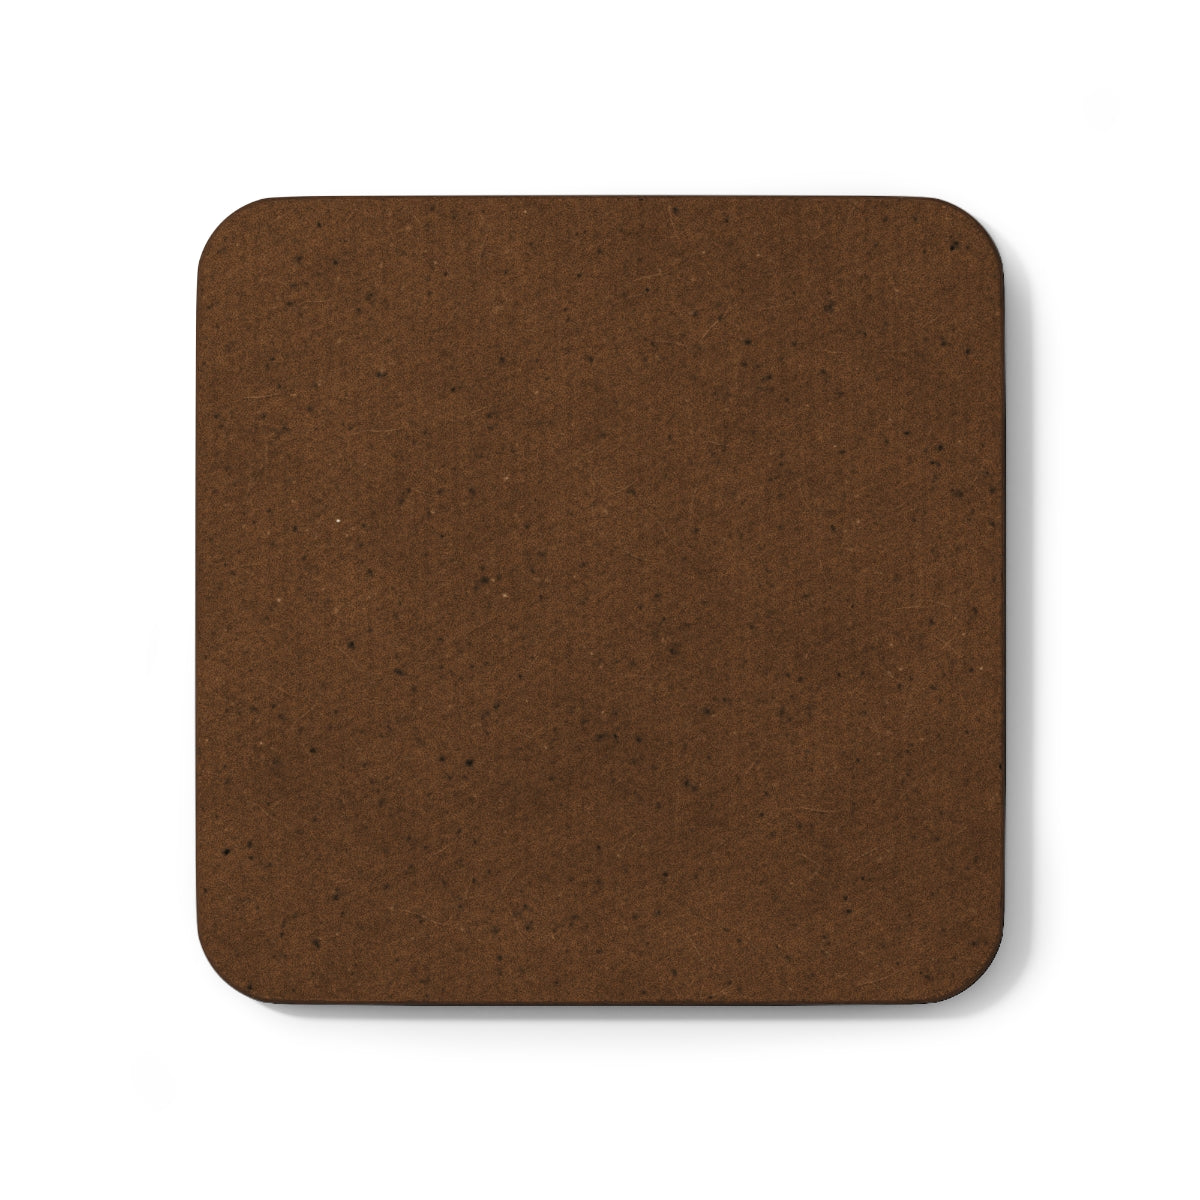 Where Are You Going in That? Stylish Bridgetteism Hardboard Back Coaster